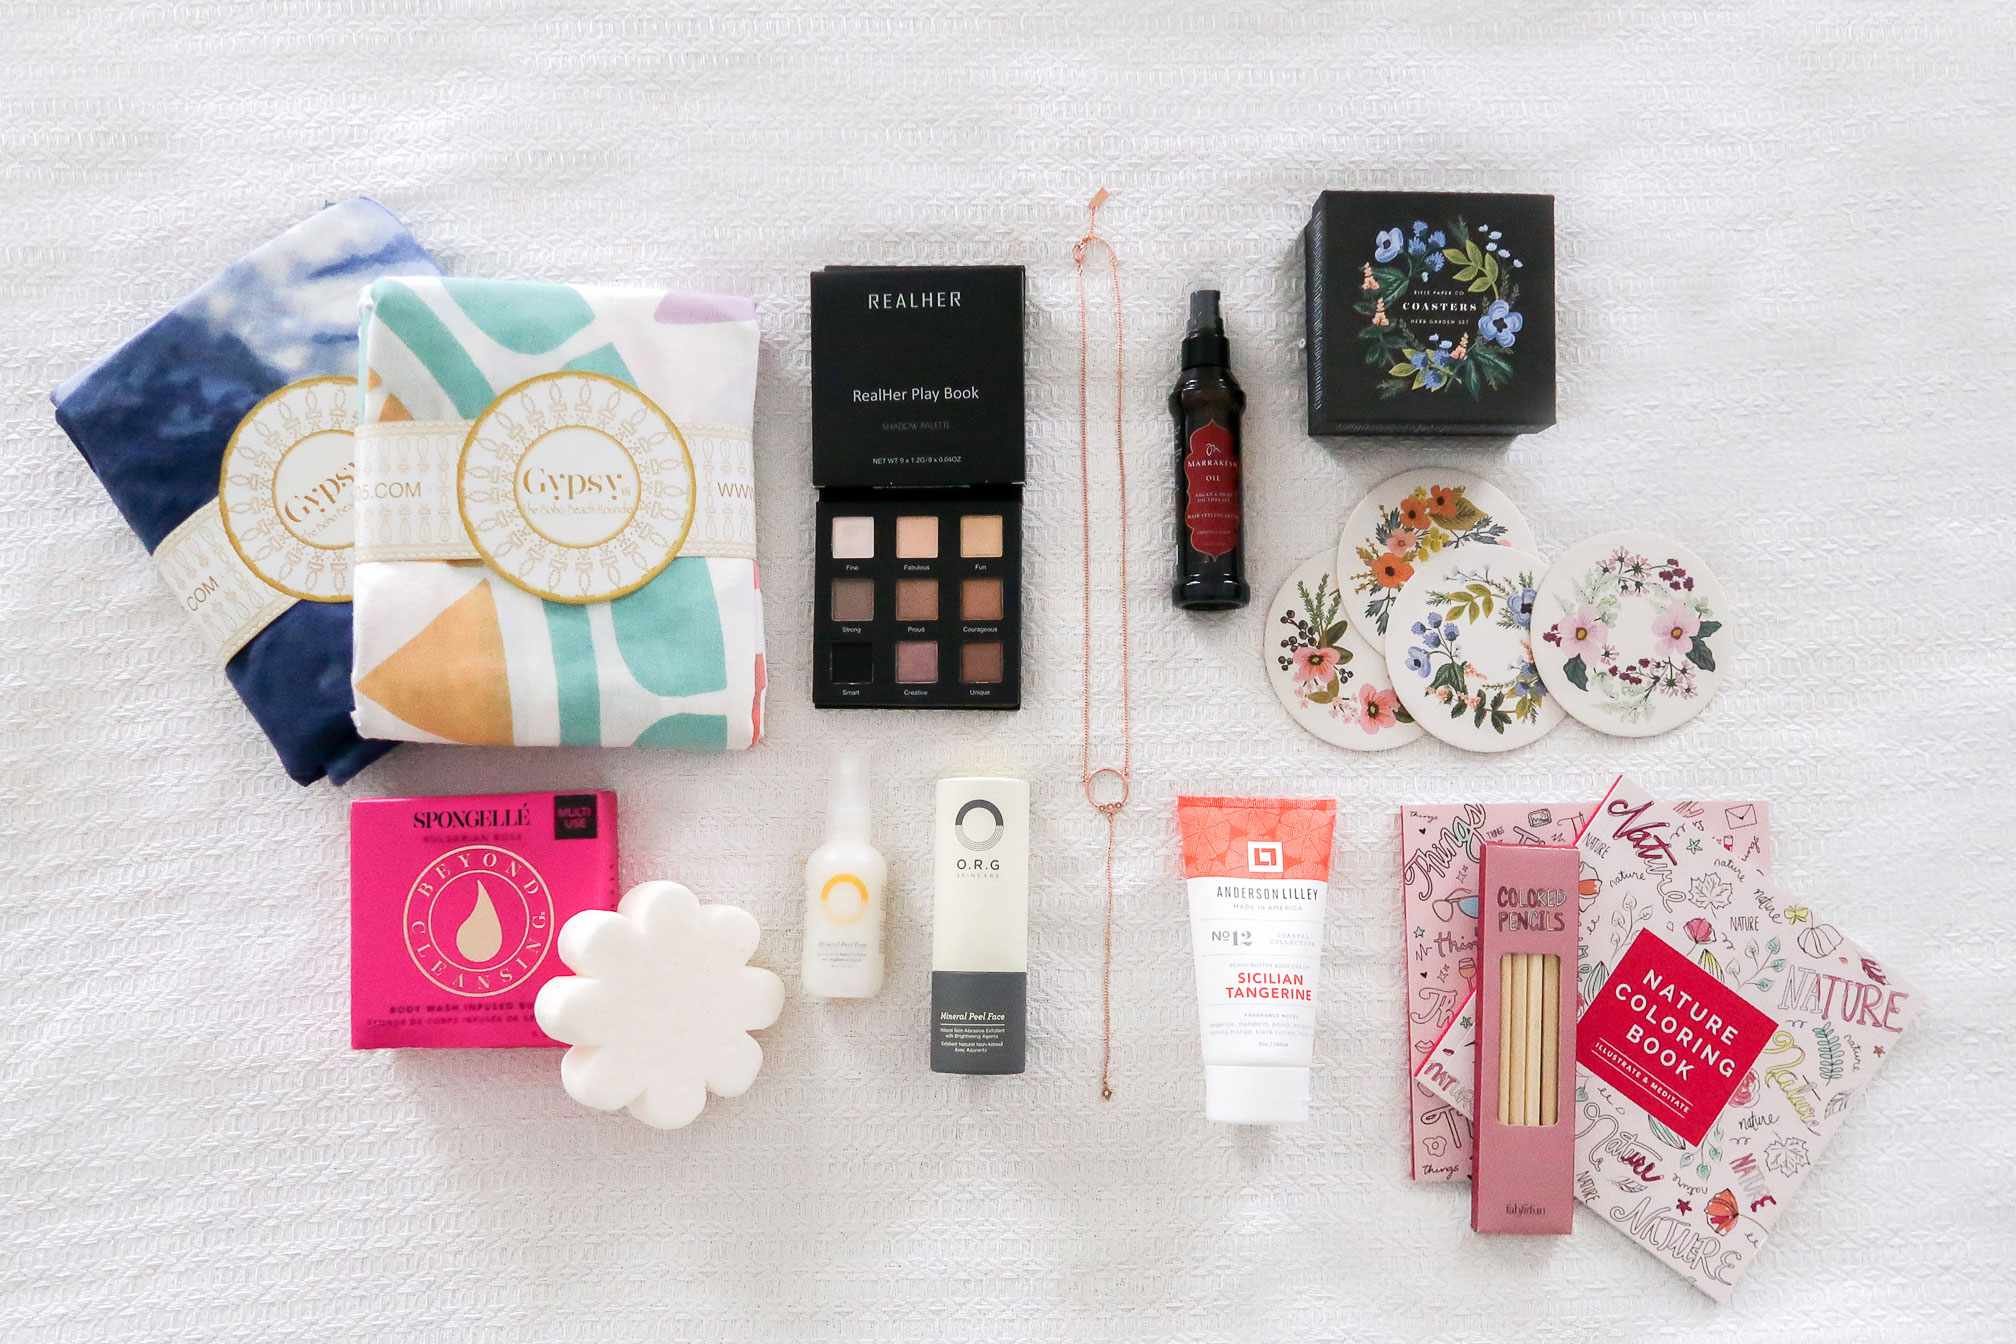 Here's the Official Look at the Editor's Box - FabFitFun